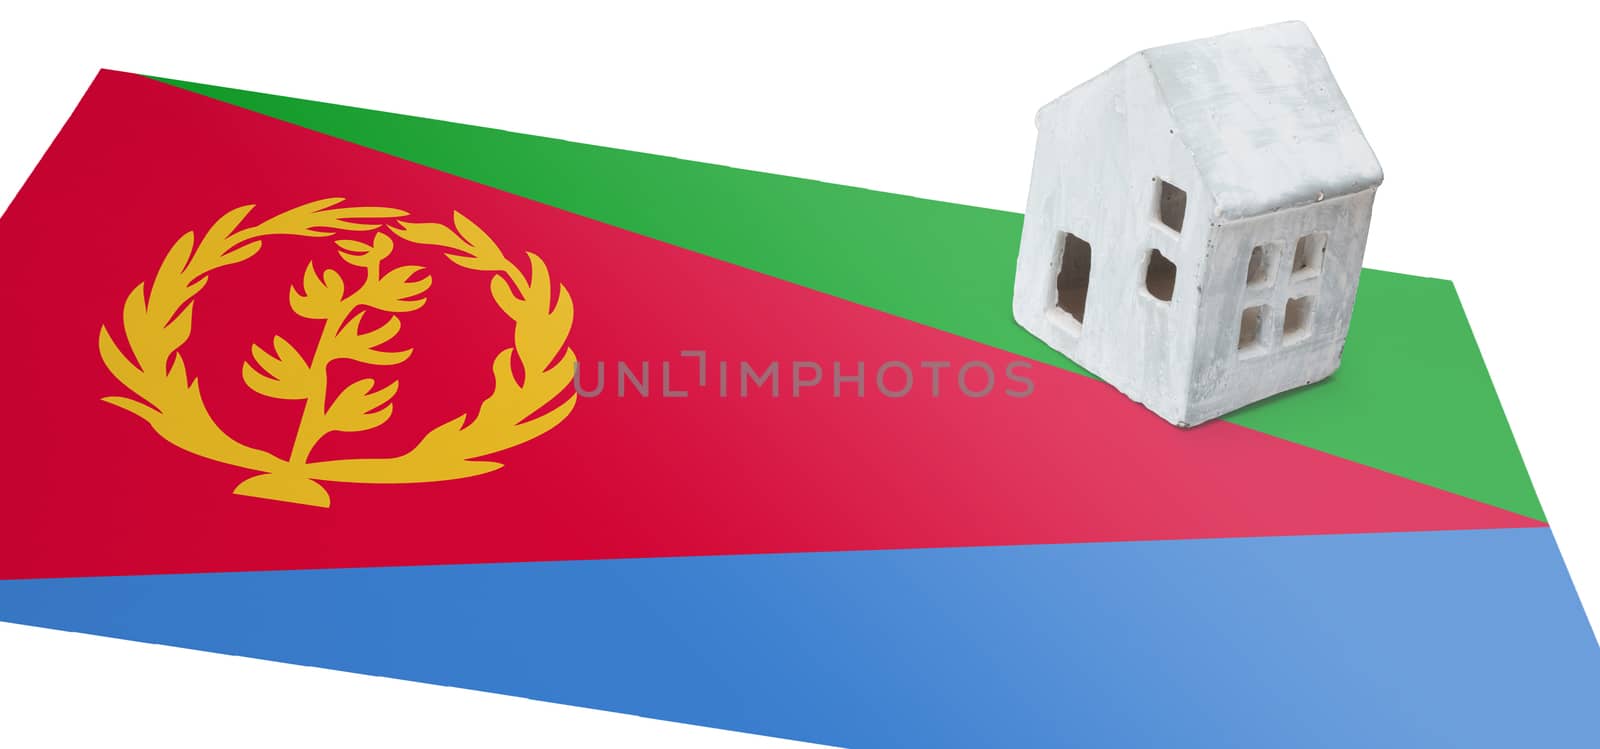 Small house on a flag - Living or migrating to Eritrea